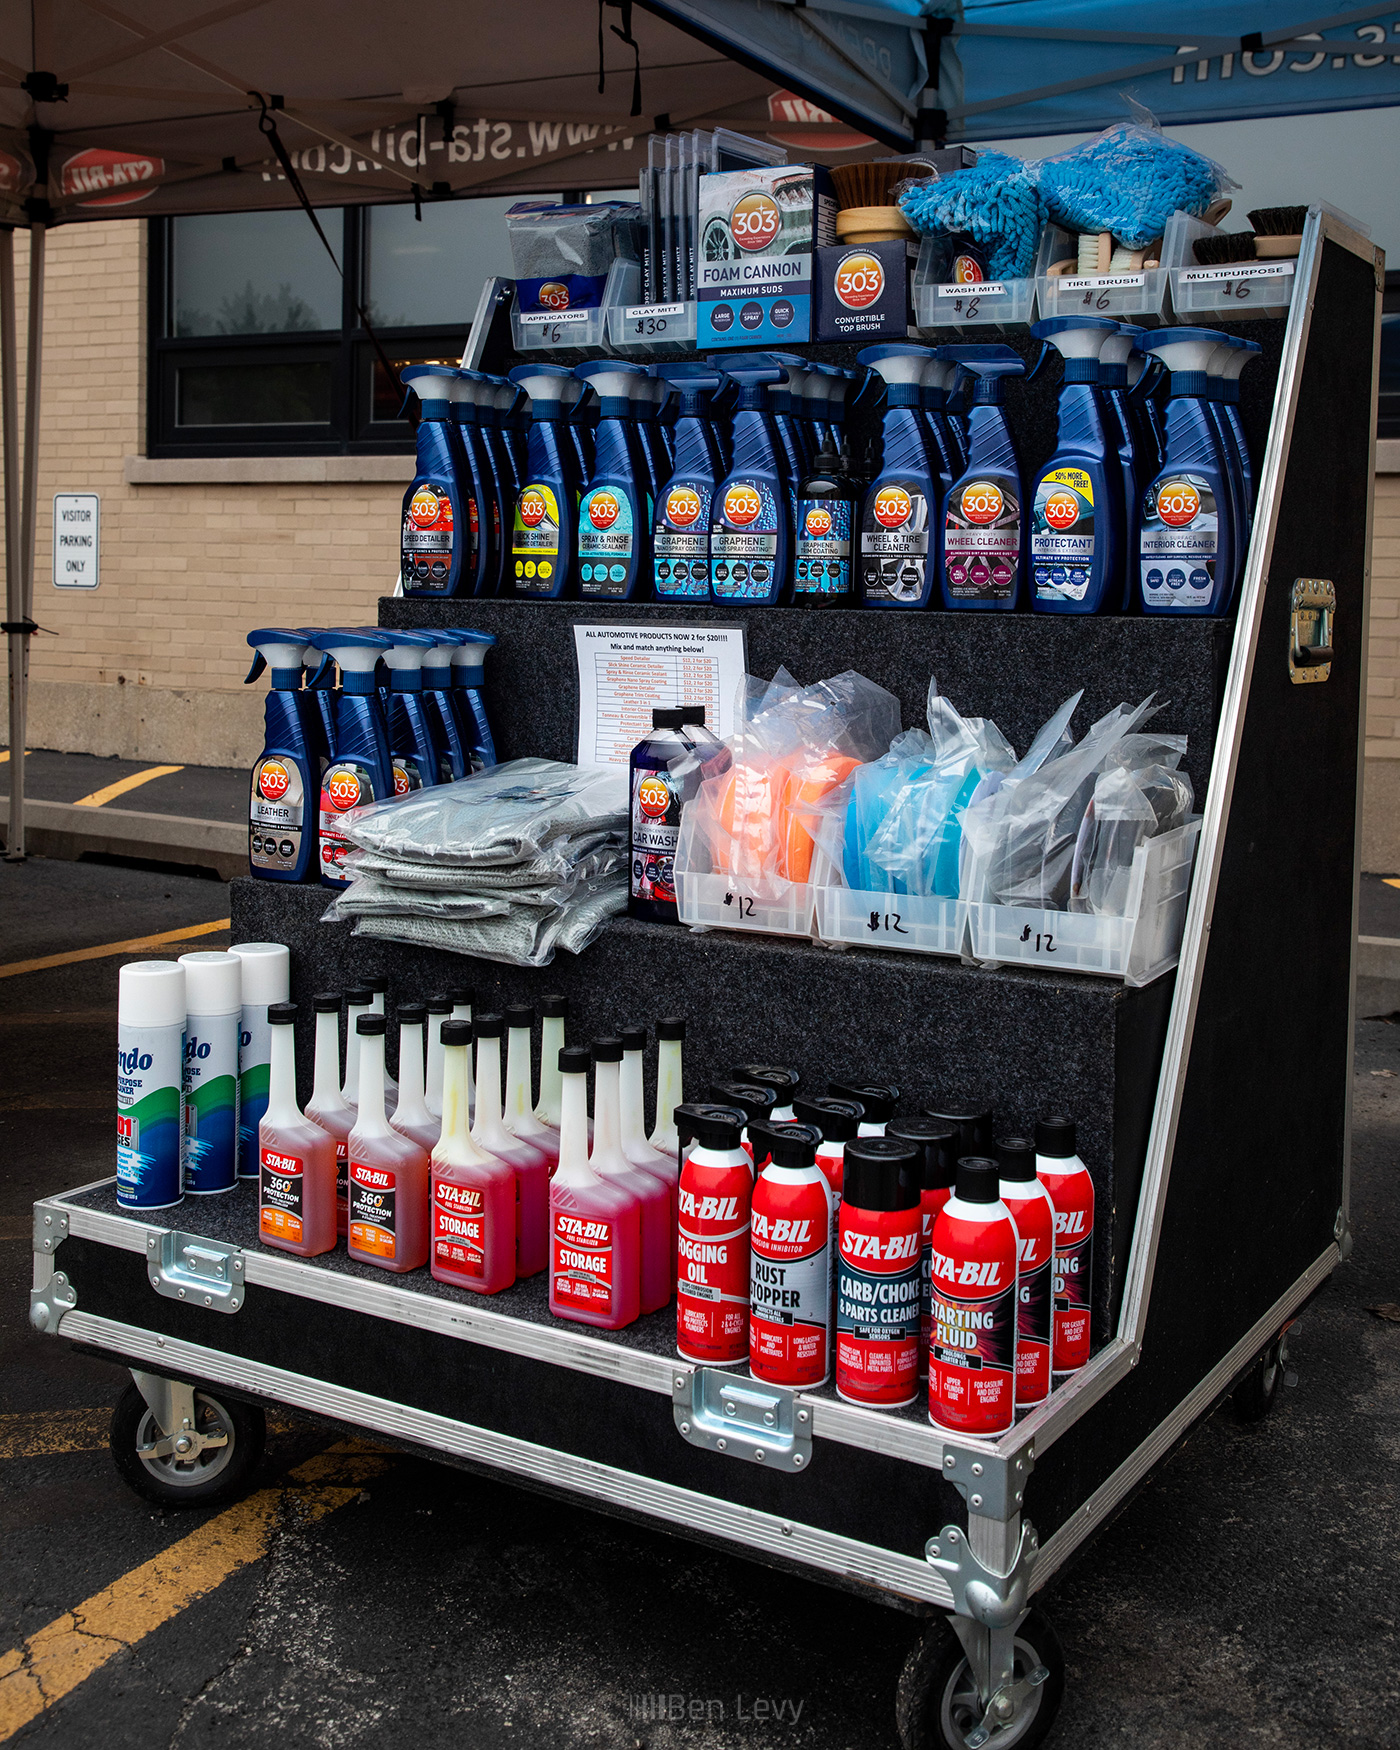 303 Car Care and STA-BIL Products on Display